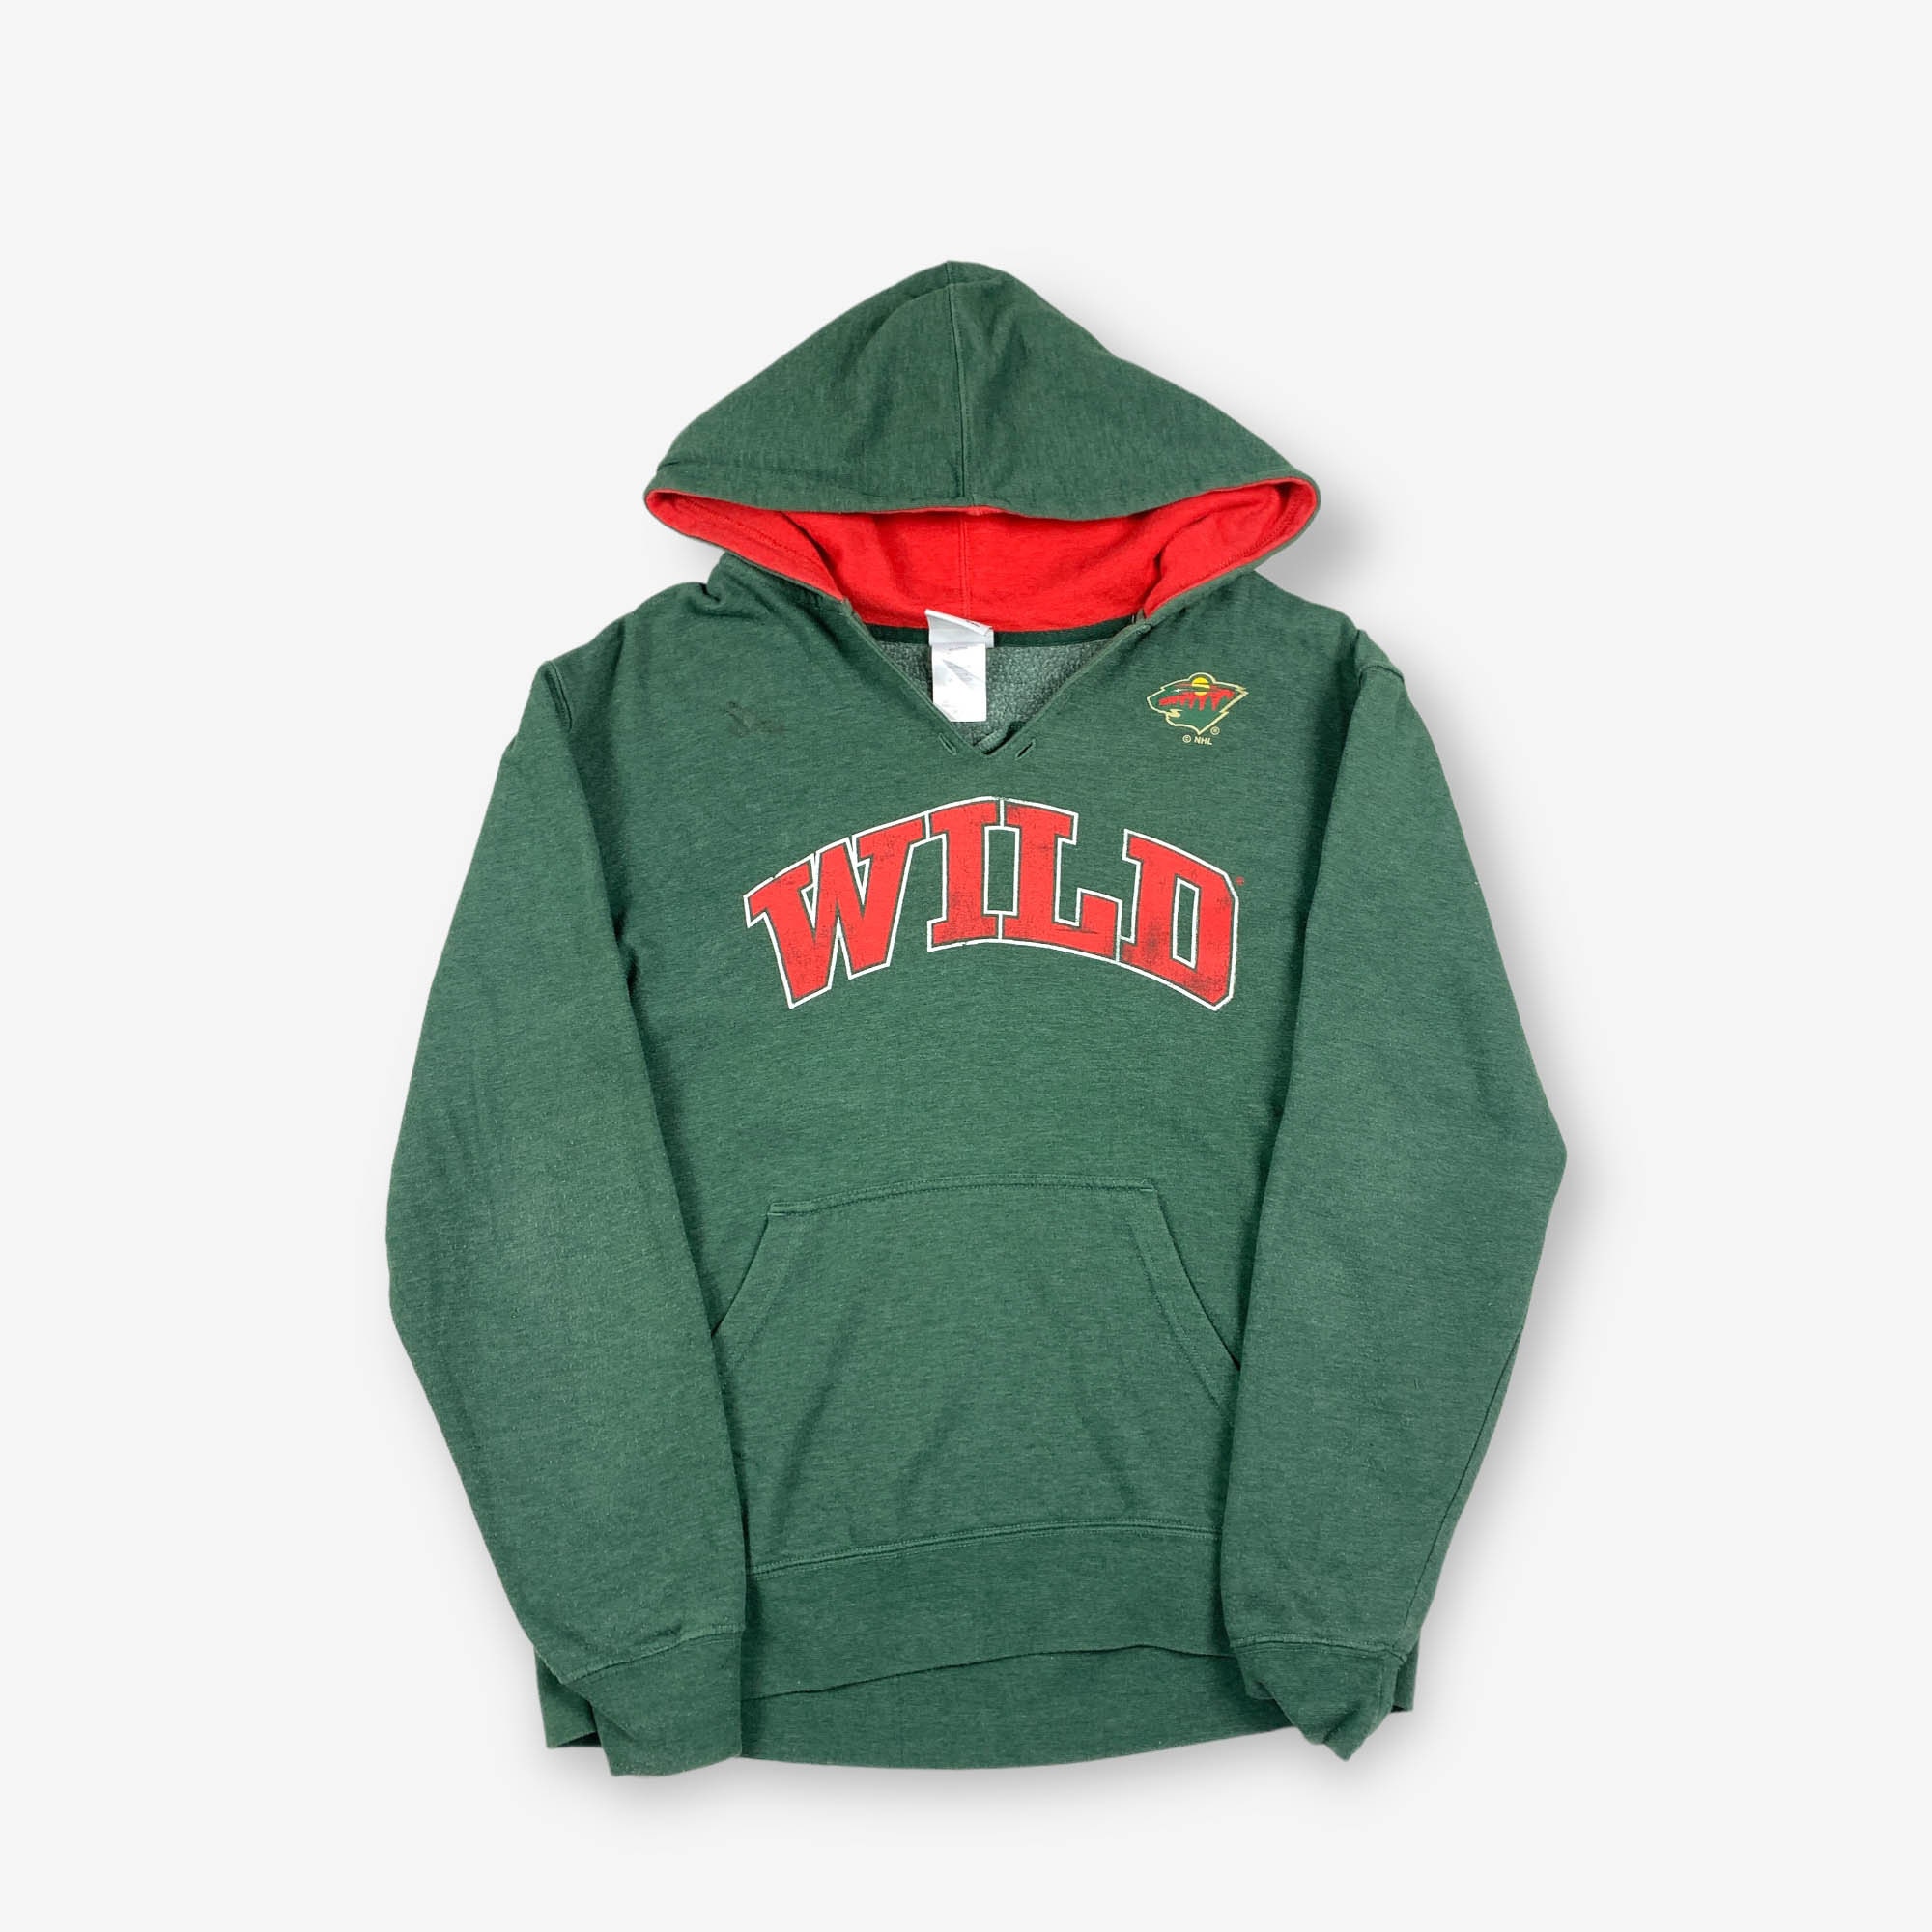 Old Time Hockey, Shirts, Old Time Hockeyminnesotawild Red And Green  Hoodie Sweatshirt Size Medium